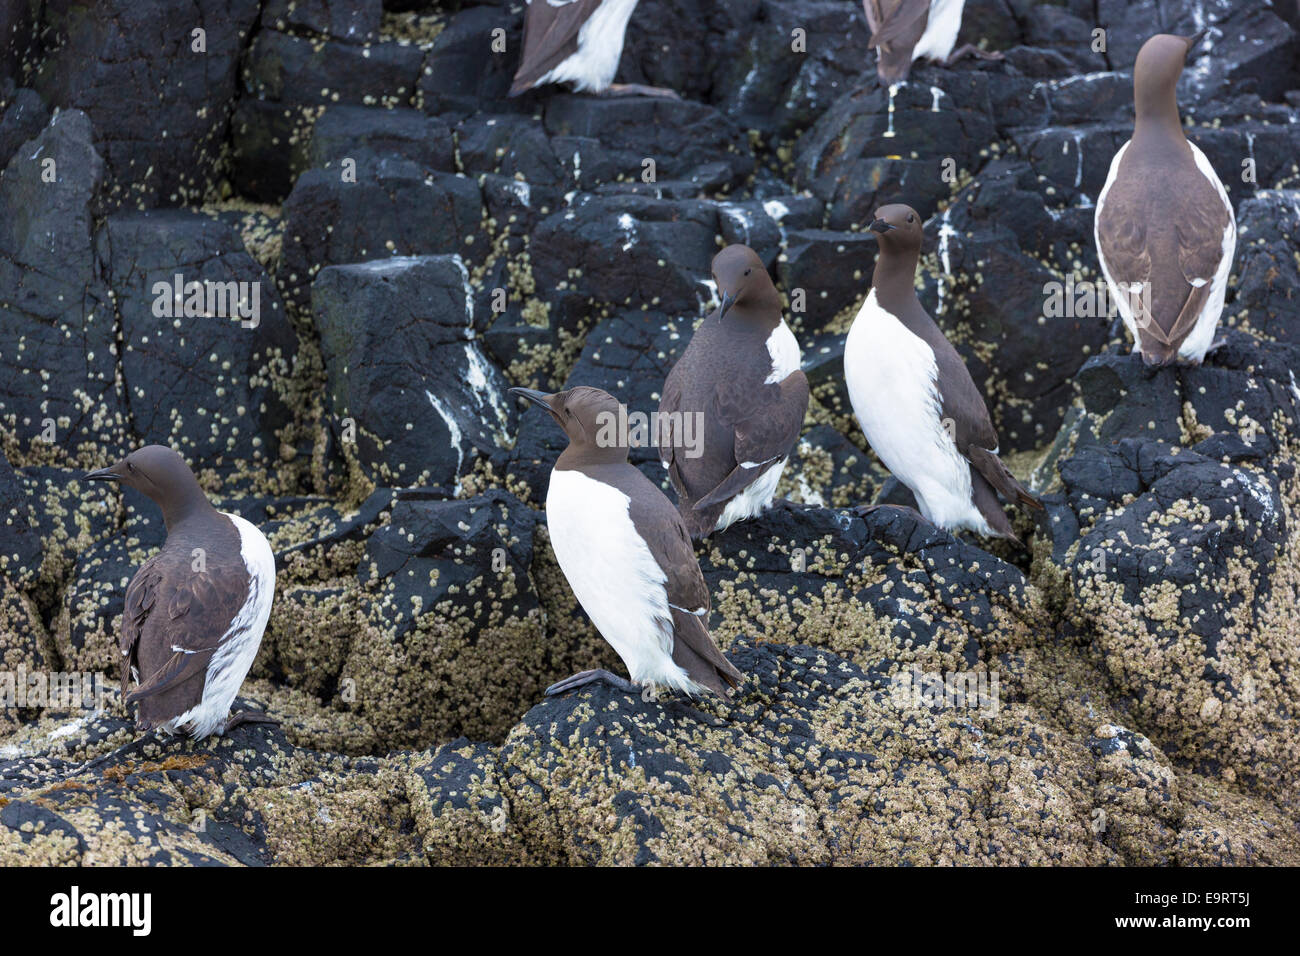 Endangered species Common Guillemot or Common Murre colony of seabirds, Uria aalge, endangered species of the aUK family (part o Stock Photo